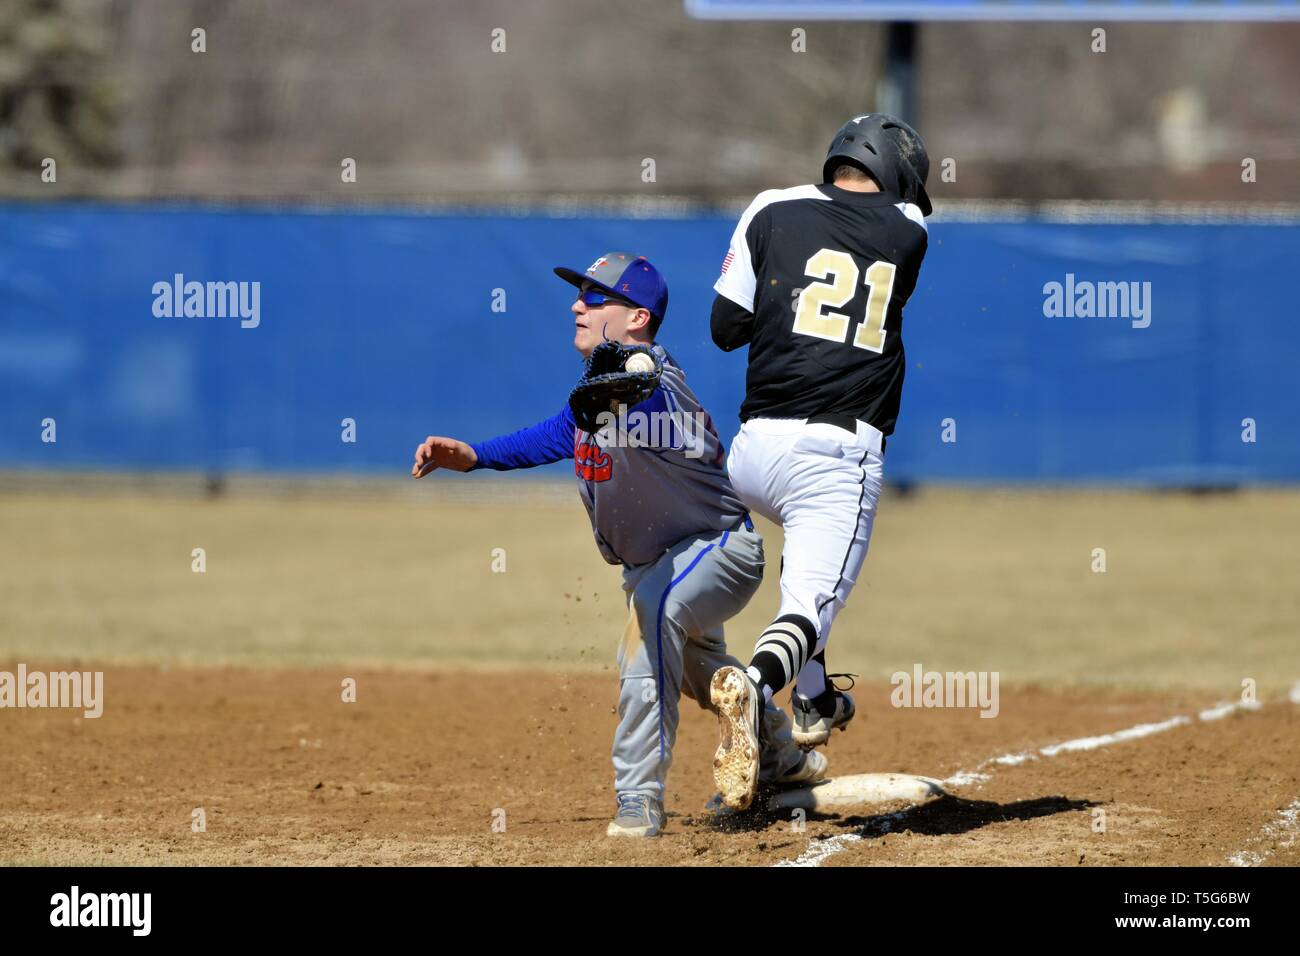 Base runner being retired on a close play at first base as the first baseman stretched to accept the throw. USA. Stock Photo